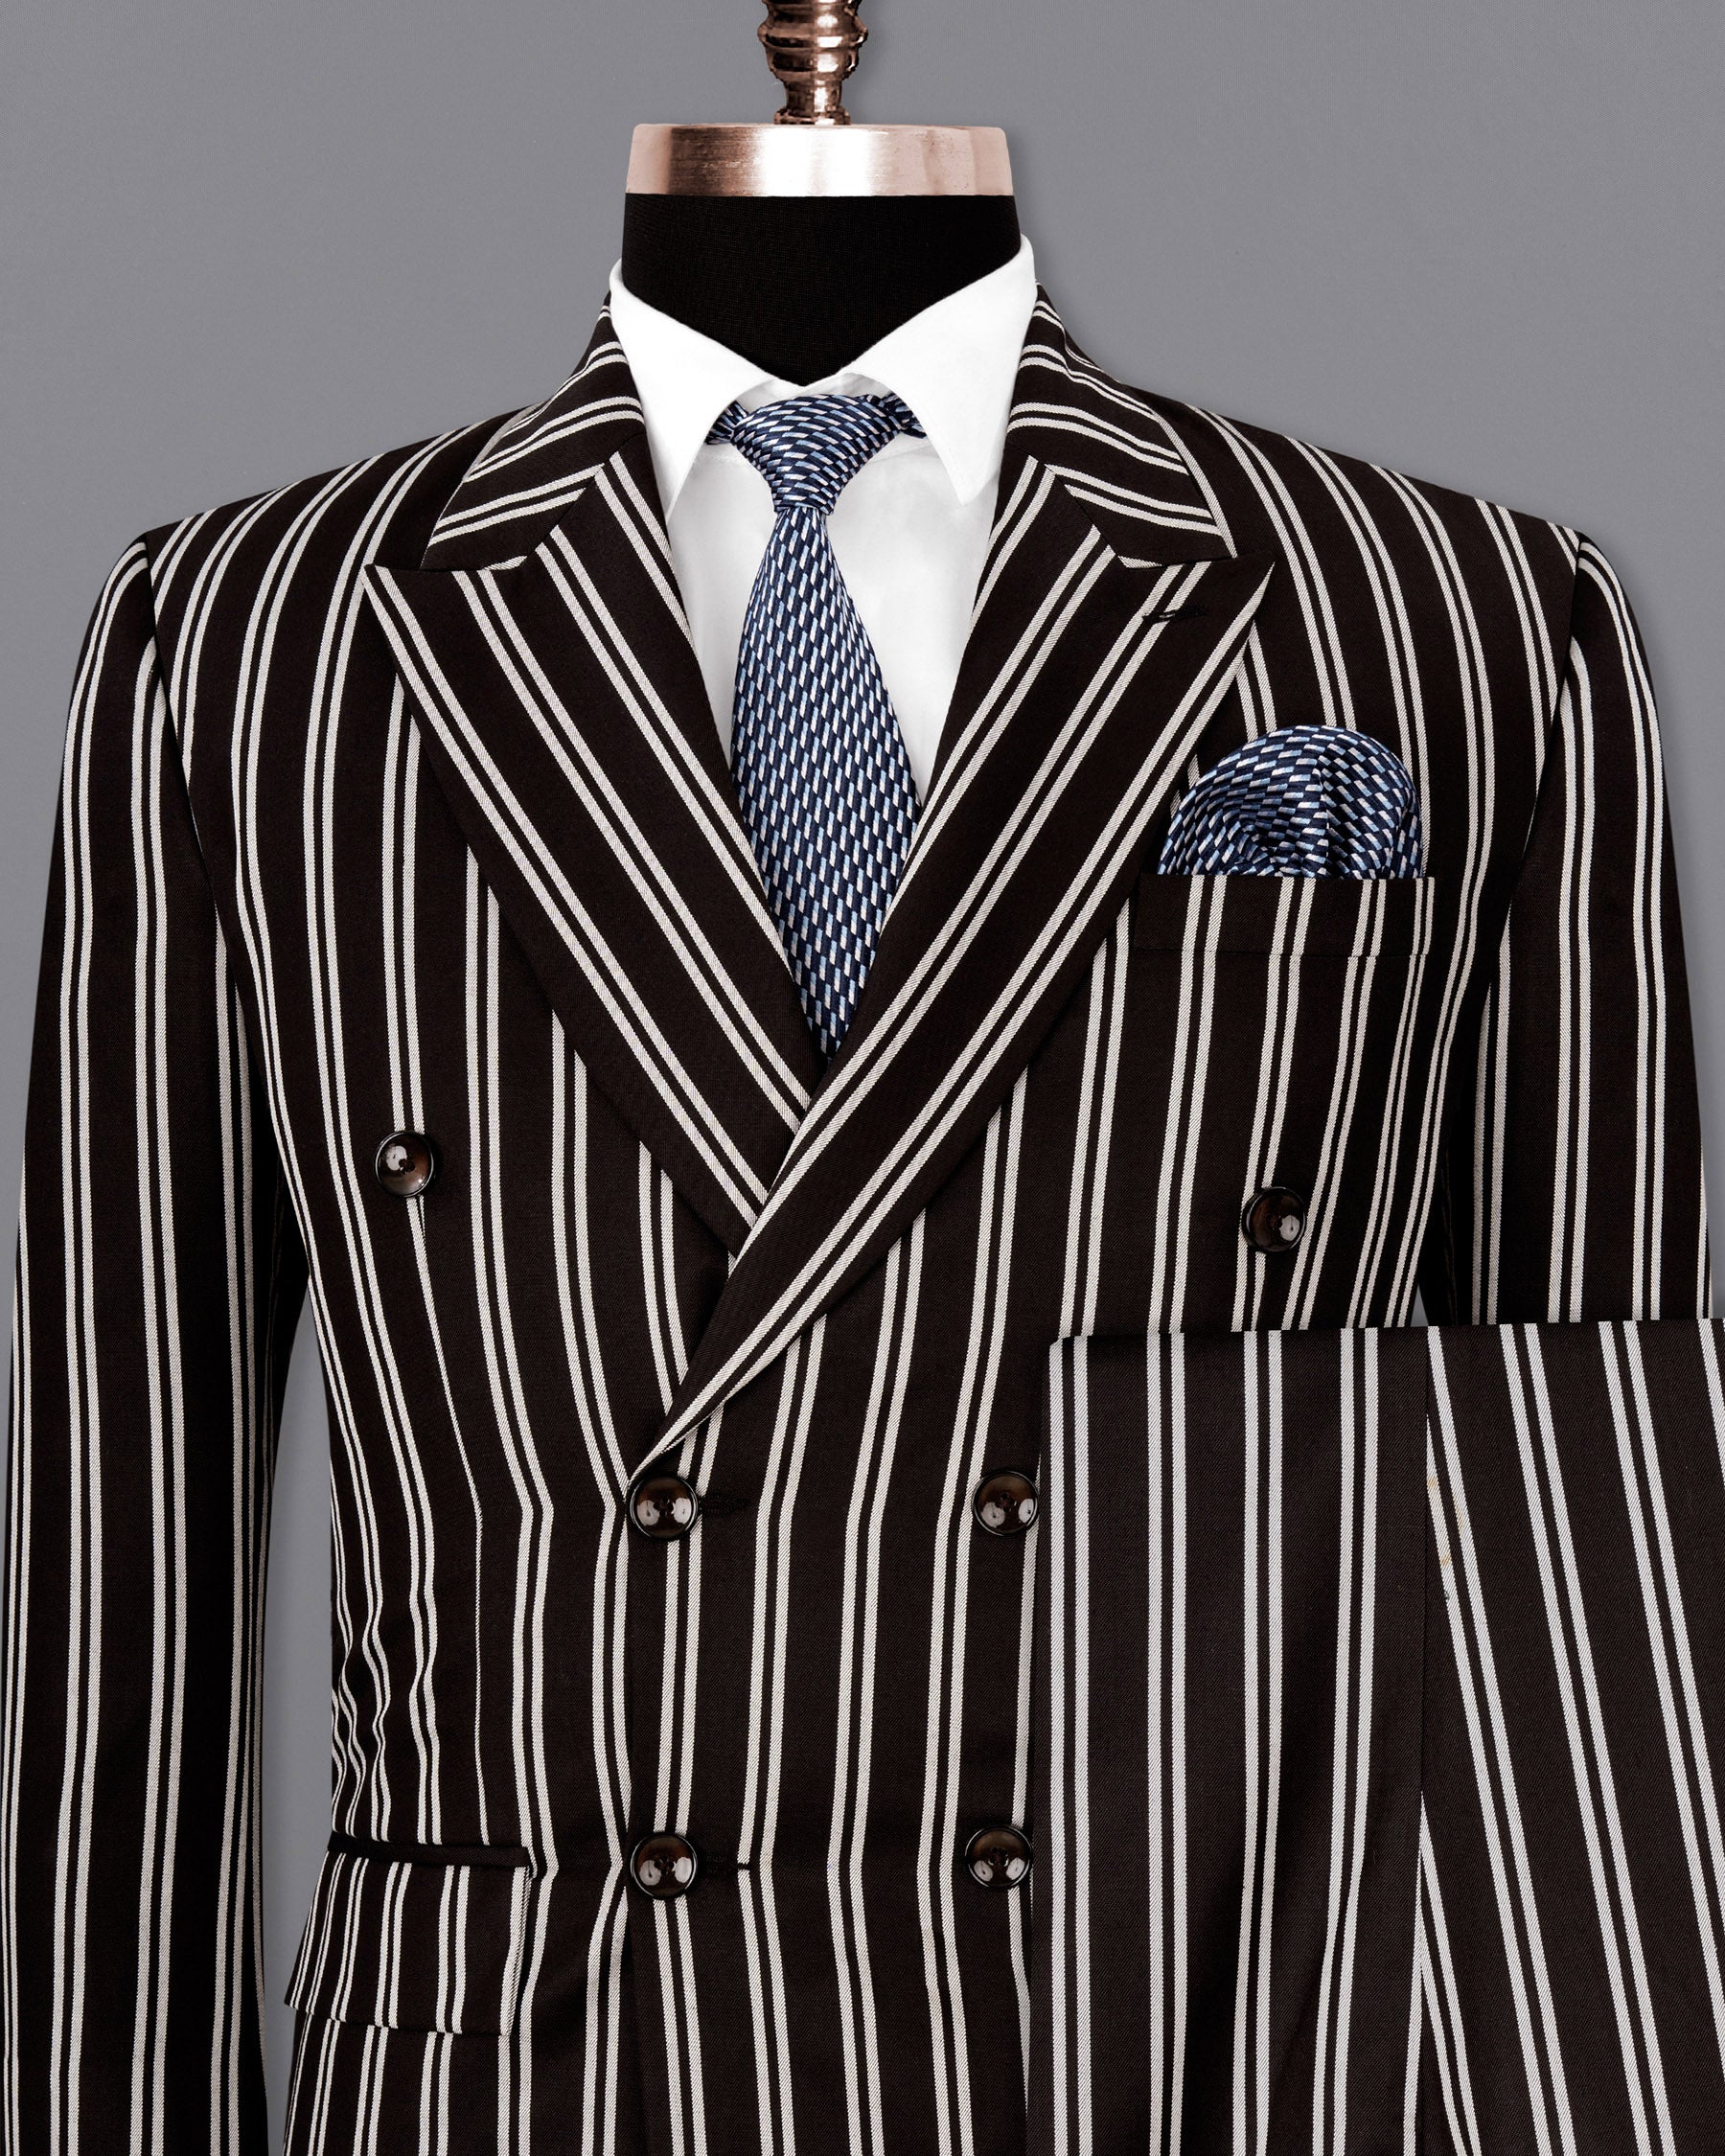 Jade Black Striped Double Breasted Suit ST1727-DB-36, ST1727-DB-38, ST1727-DB-40, ST1727-DB-42, ST1727-DB-44, ST1727-DB-46, ST1727-DB-48, ST1727-DB-50, ST1727-DB-52, ST1727-DB-54, ST1727-DB-56, ST1727-DB-58, ST1727-DB-60